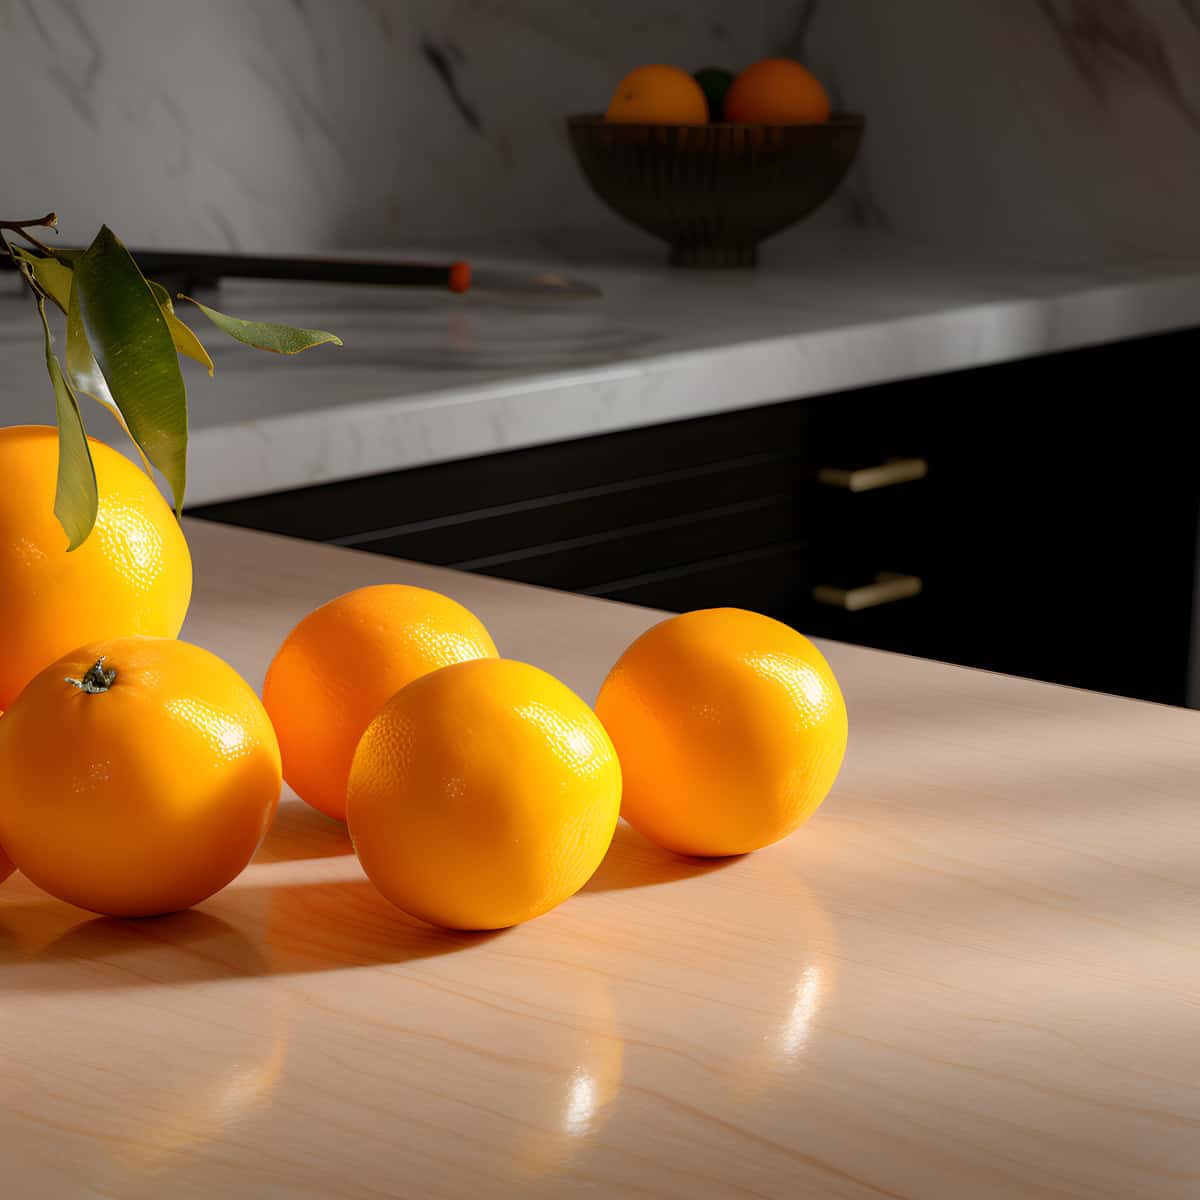 Tangor Fruit on a kitchen counter